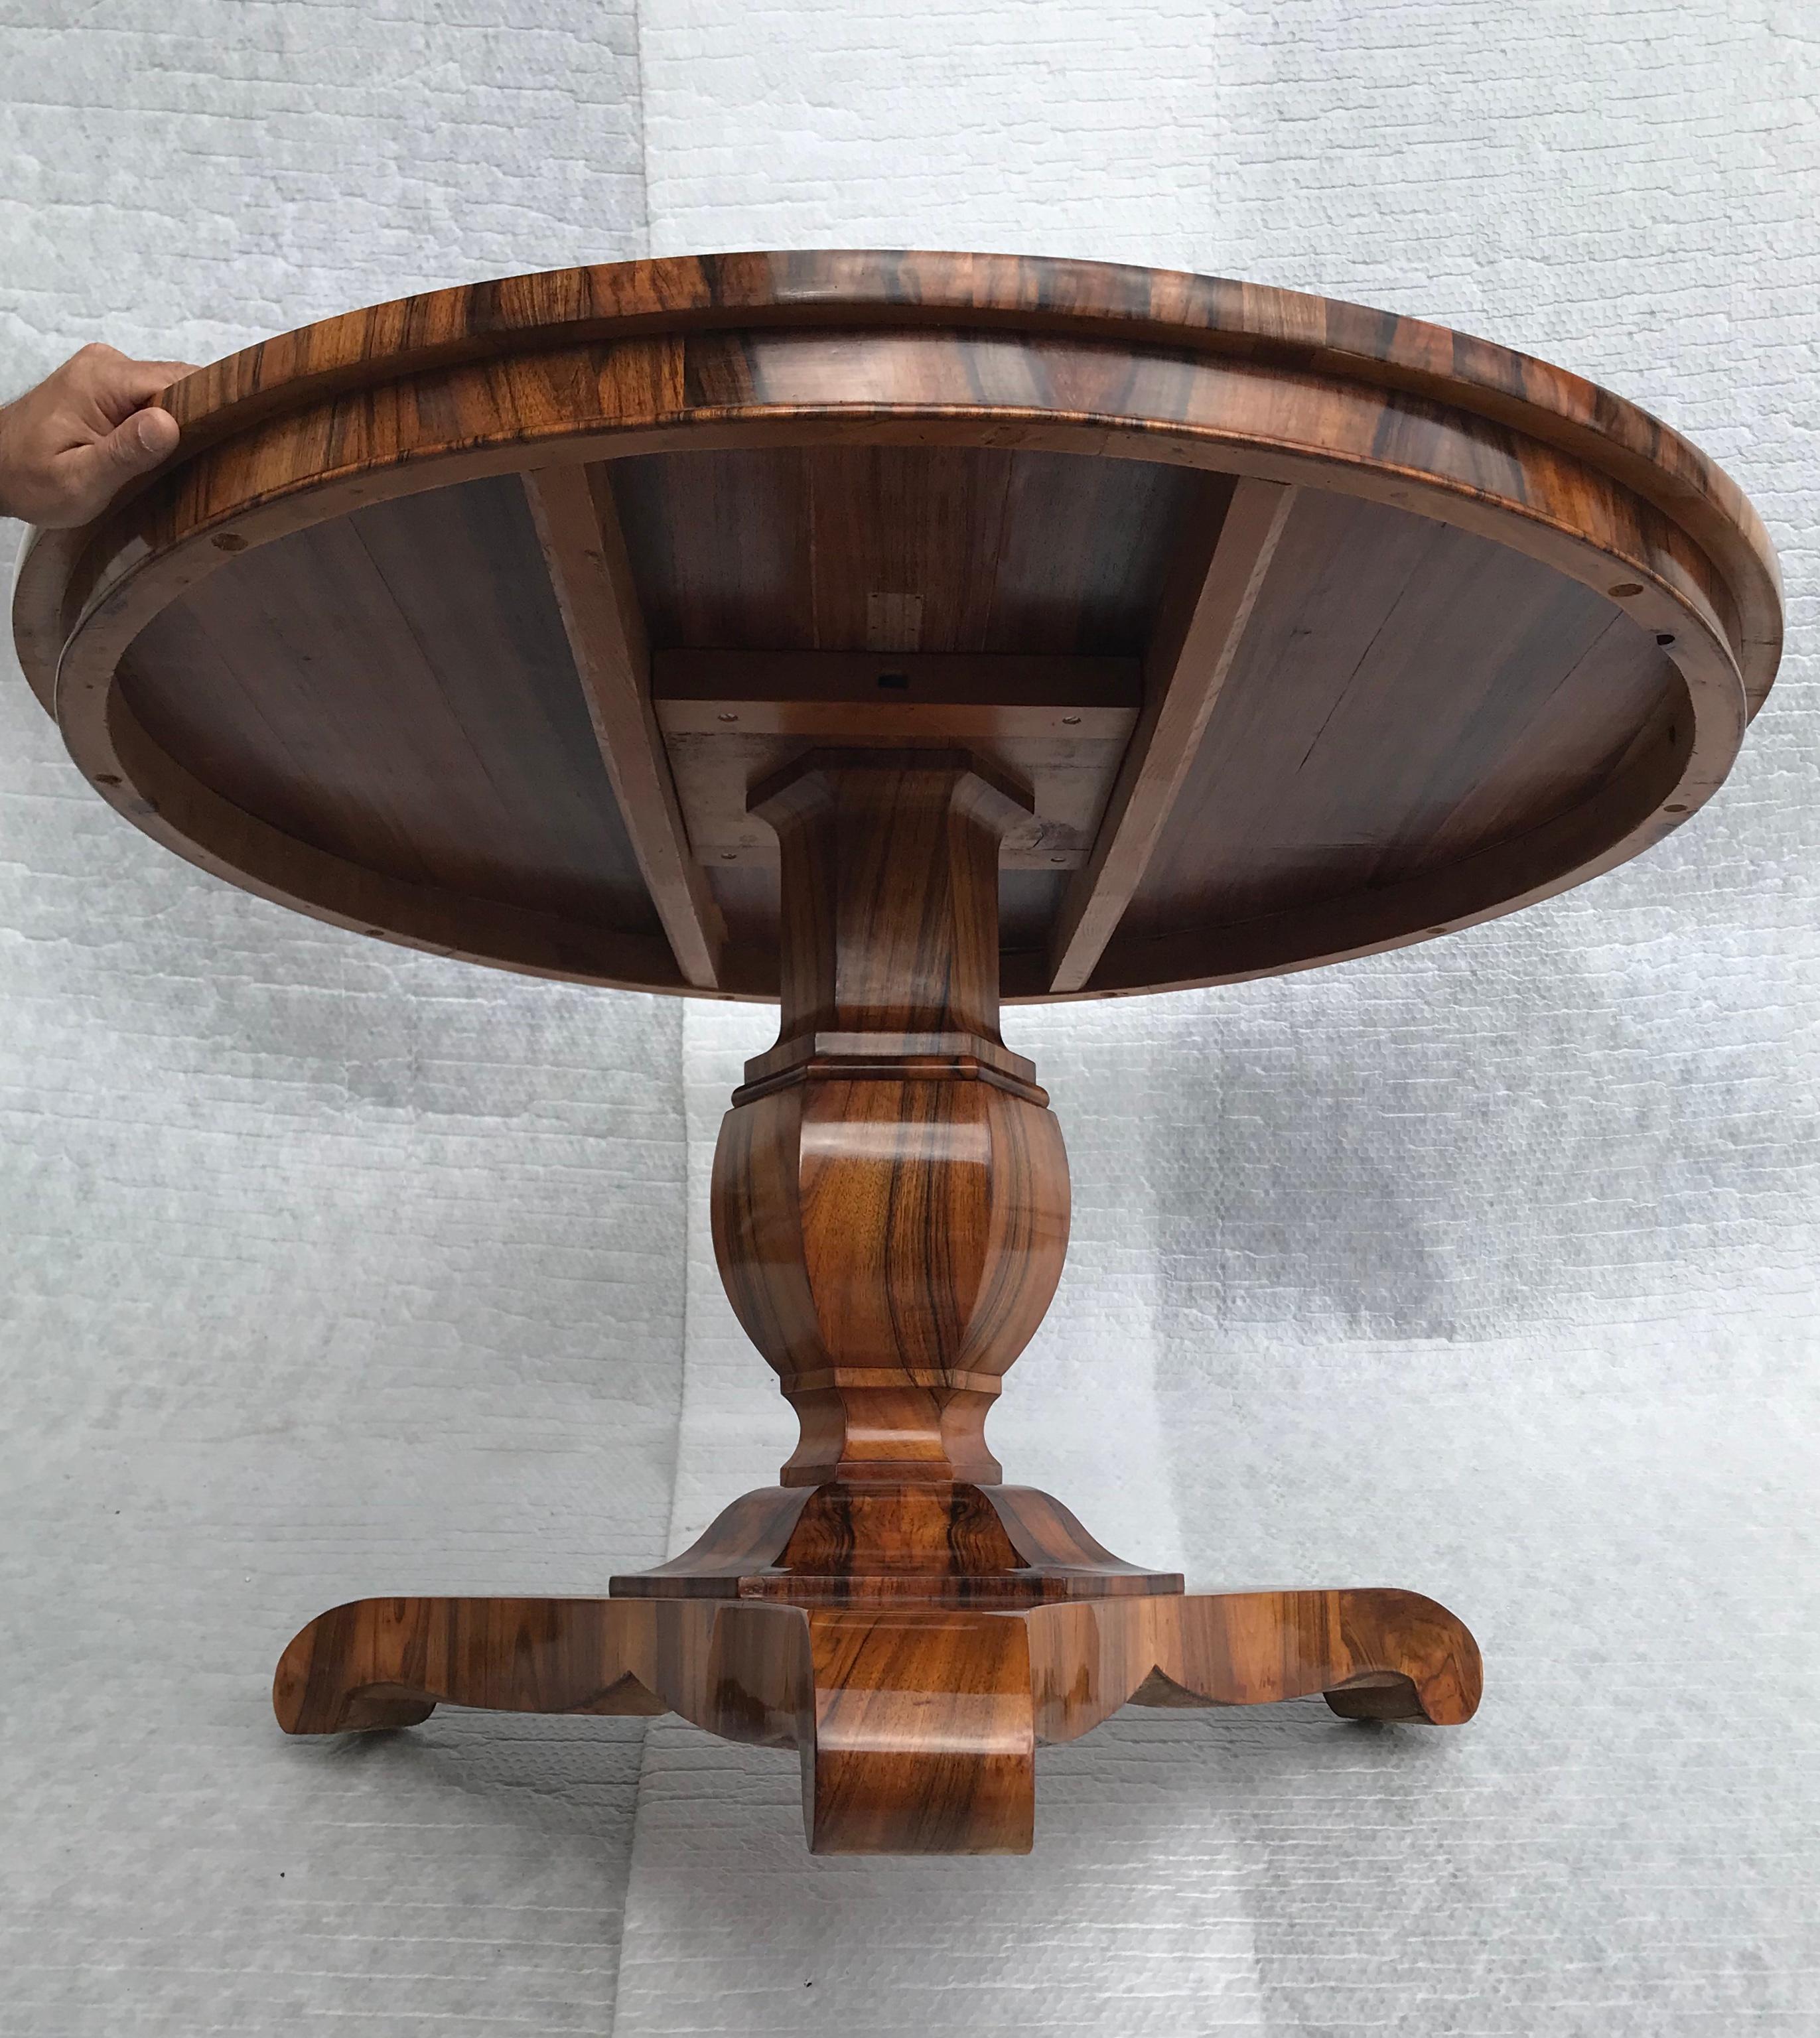 Stunning Biedermeier table, Germany 1820, beautiful walnut veneer. In excellent, refinsihed condition, French polished. 